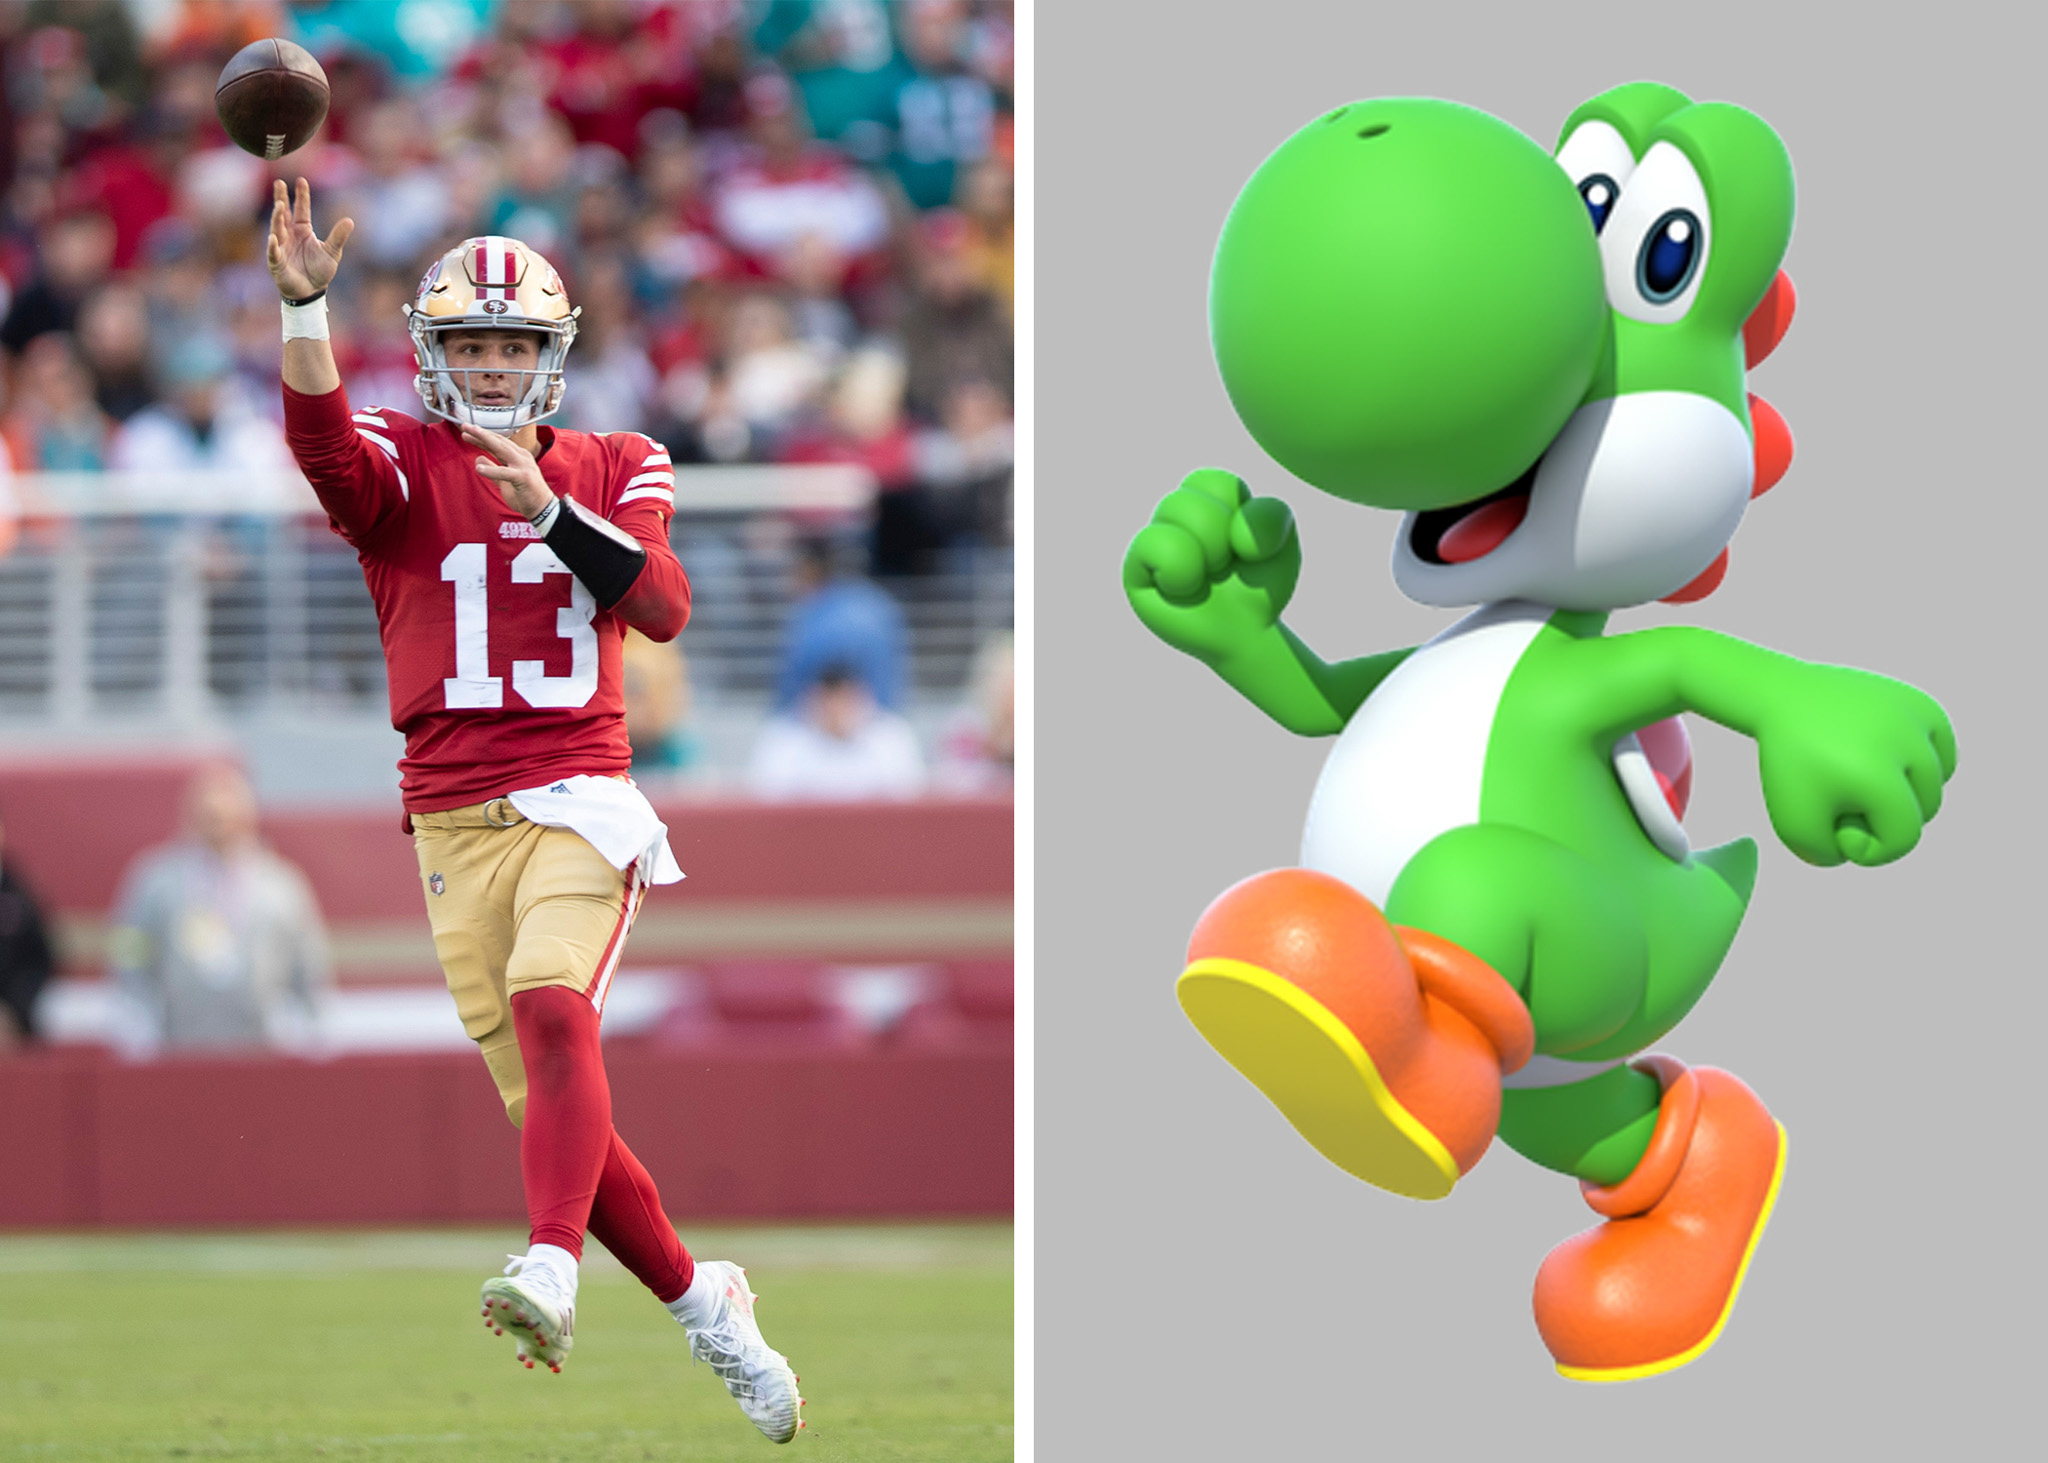 The image shows a football player in a red and gold uniform throwing a pass on the left and a cheerful, green dinosaur cartoon character (Yoshi) on the right.